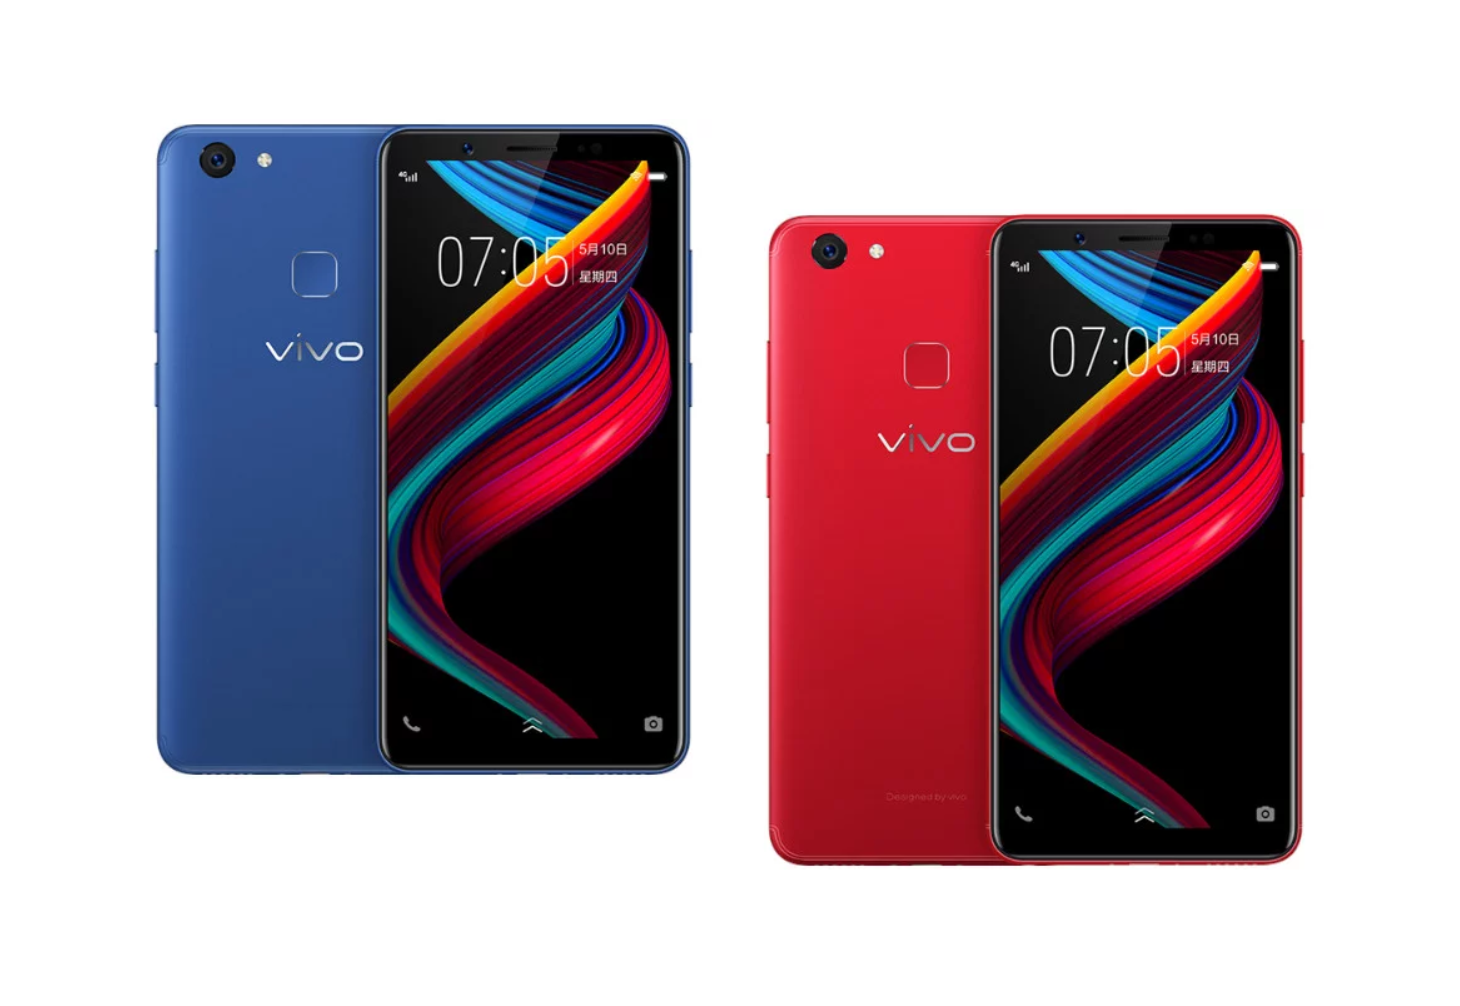 vivo to release another new low tier phone with Game Mode and Jovi AI soon in China